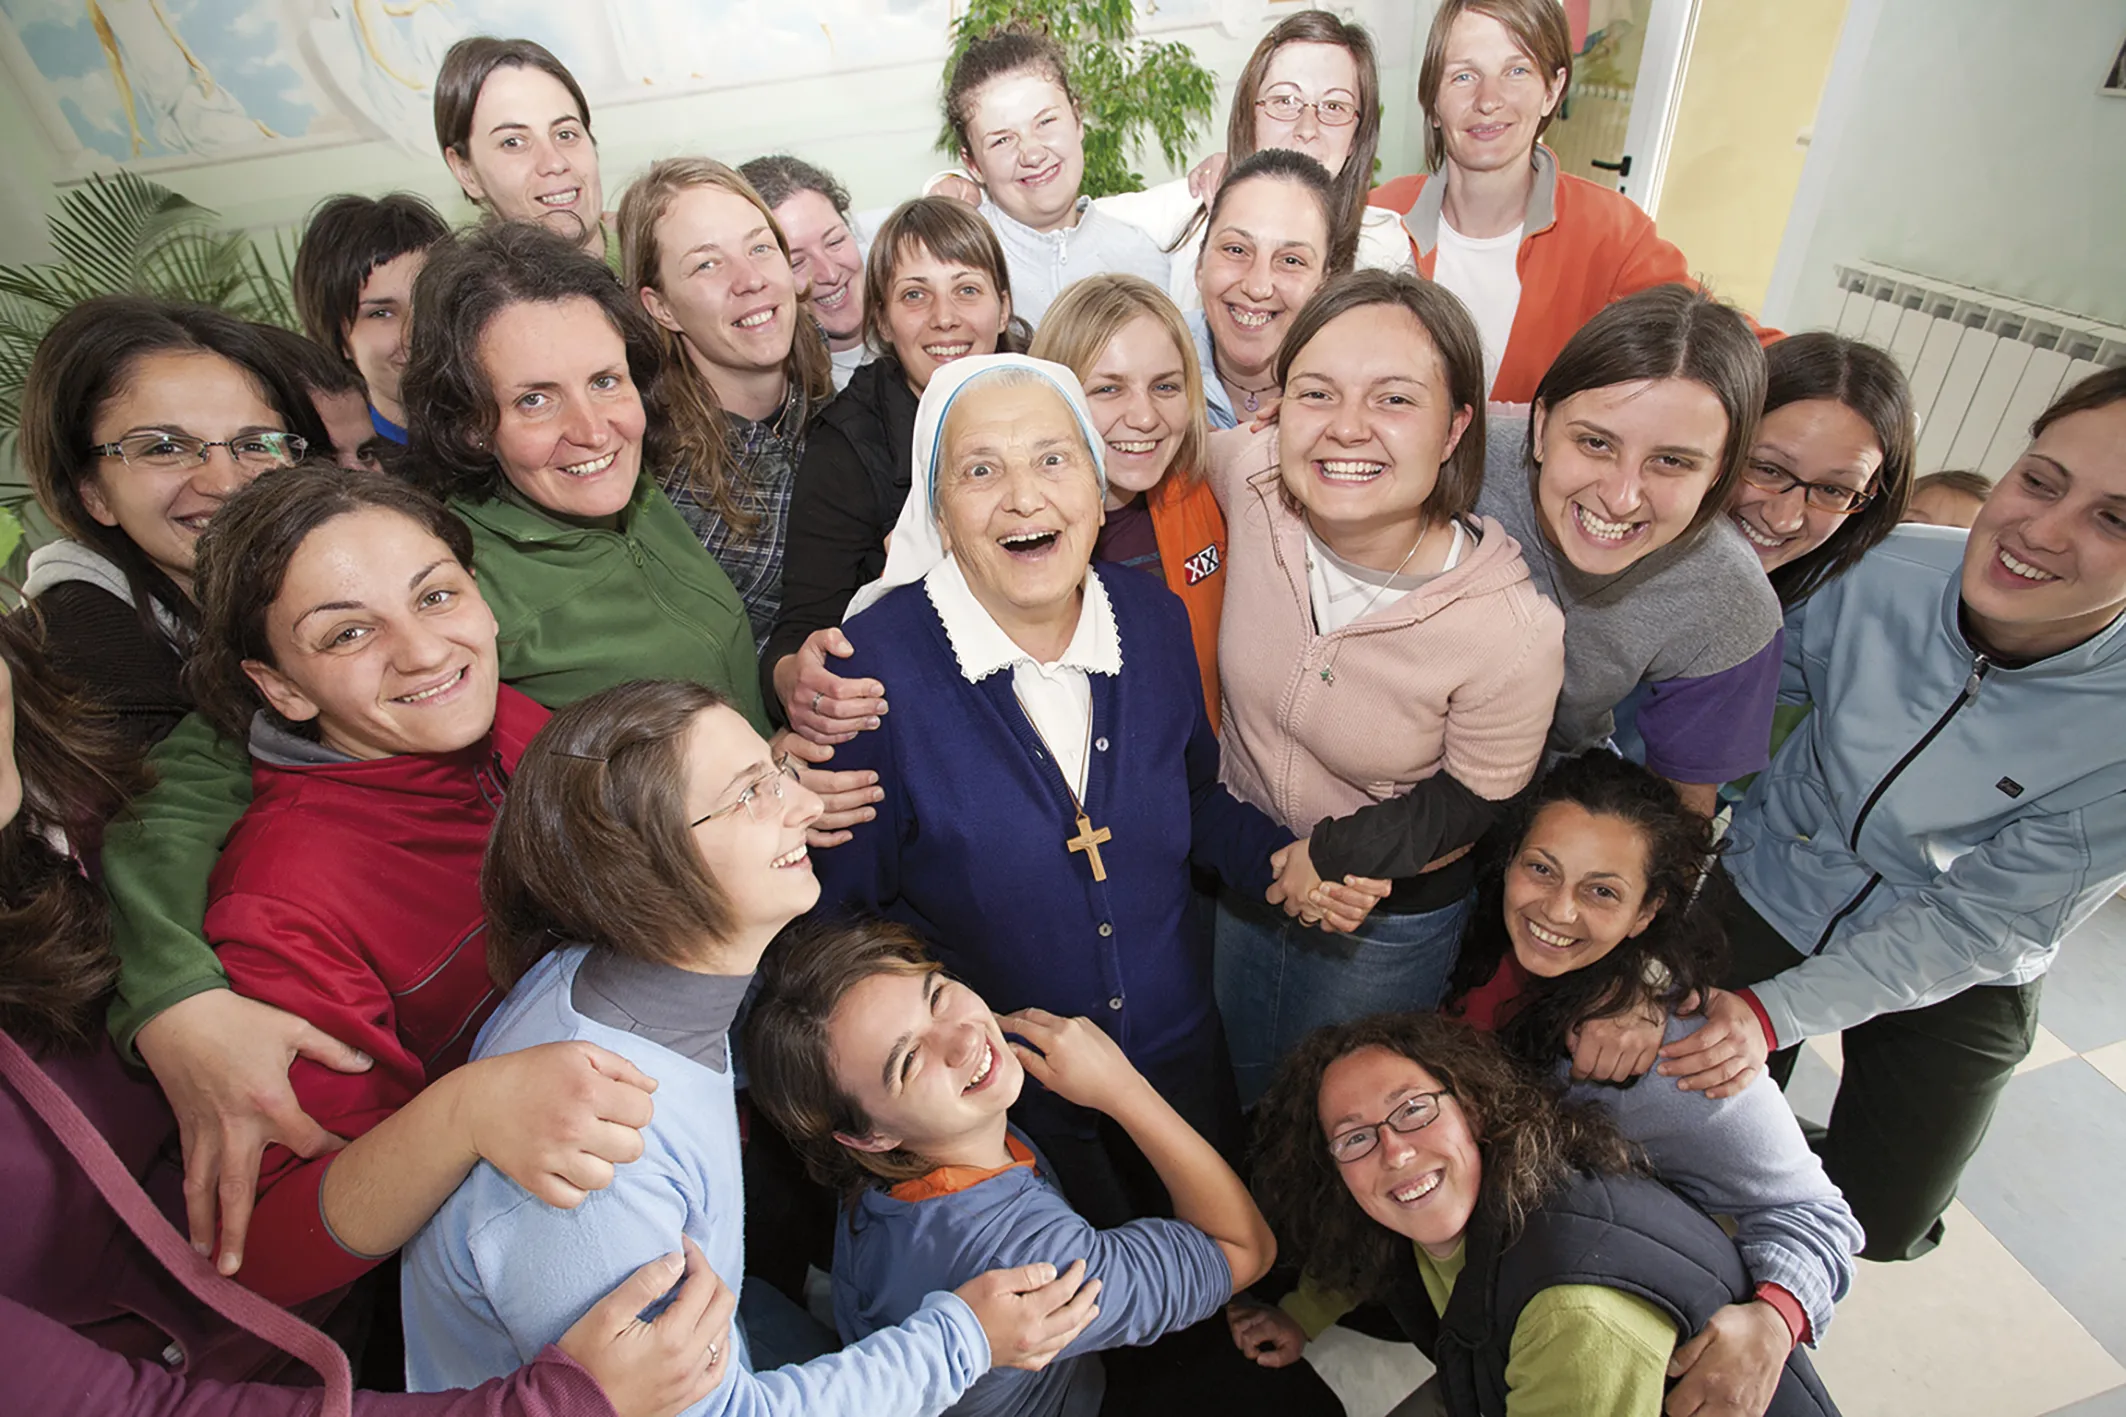 Mother Elvira, who died on Aug. 3, 2023, at age 86, was beloved for her infectious trust in God's providence, her devotion to the Eucharist, and her burning desire to share God's boundless love with those struggling in life. Courtesy of the Comunità Cenacolo